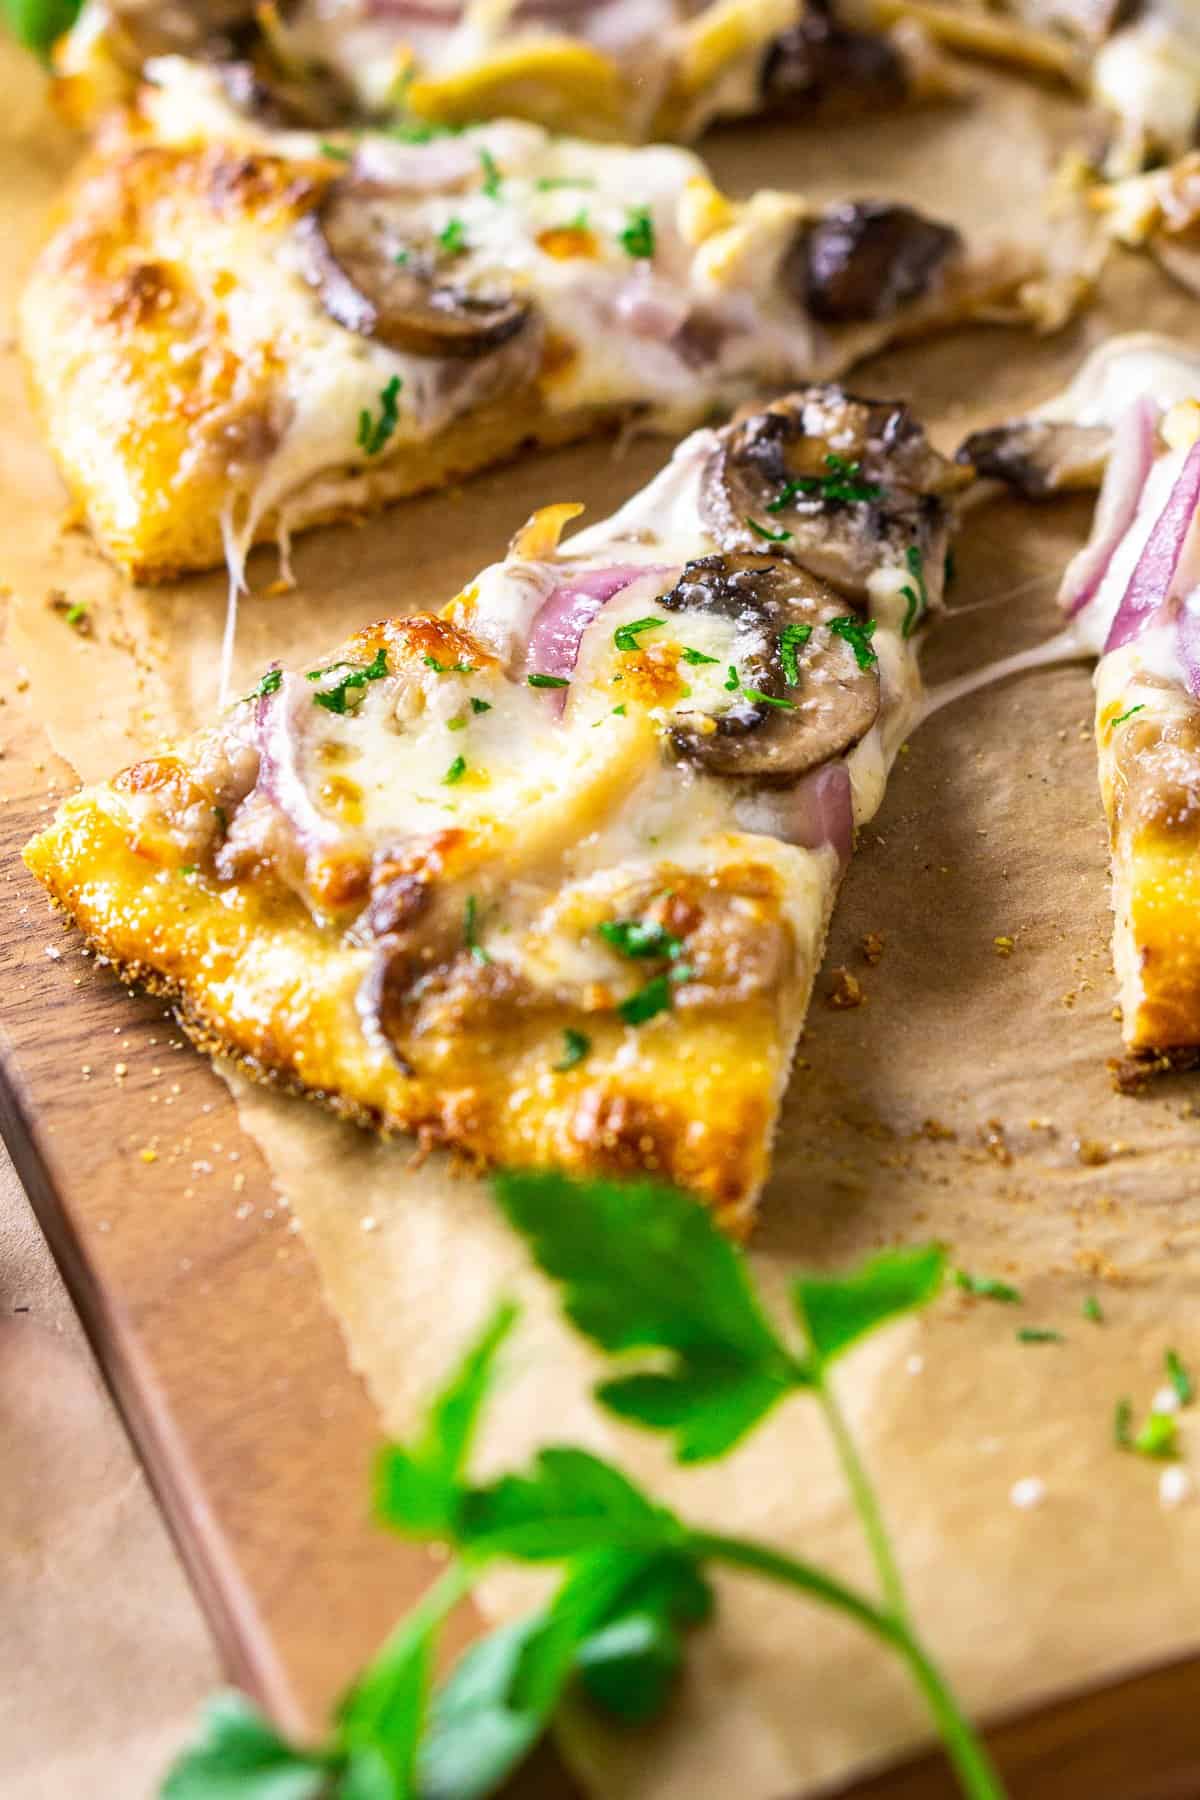 A close-up of a slice of coq au vin pizza with fresh parsley framing the pizza on a cutting board.